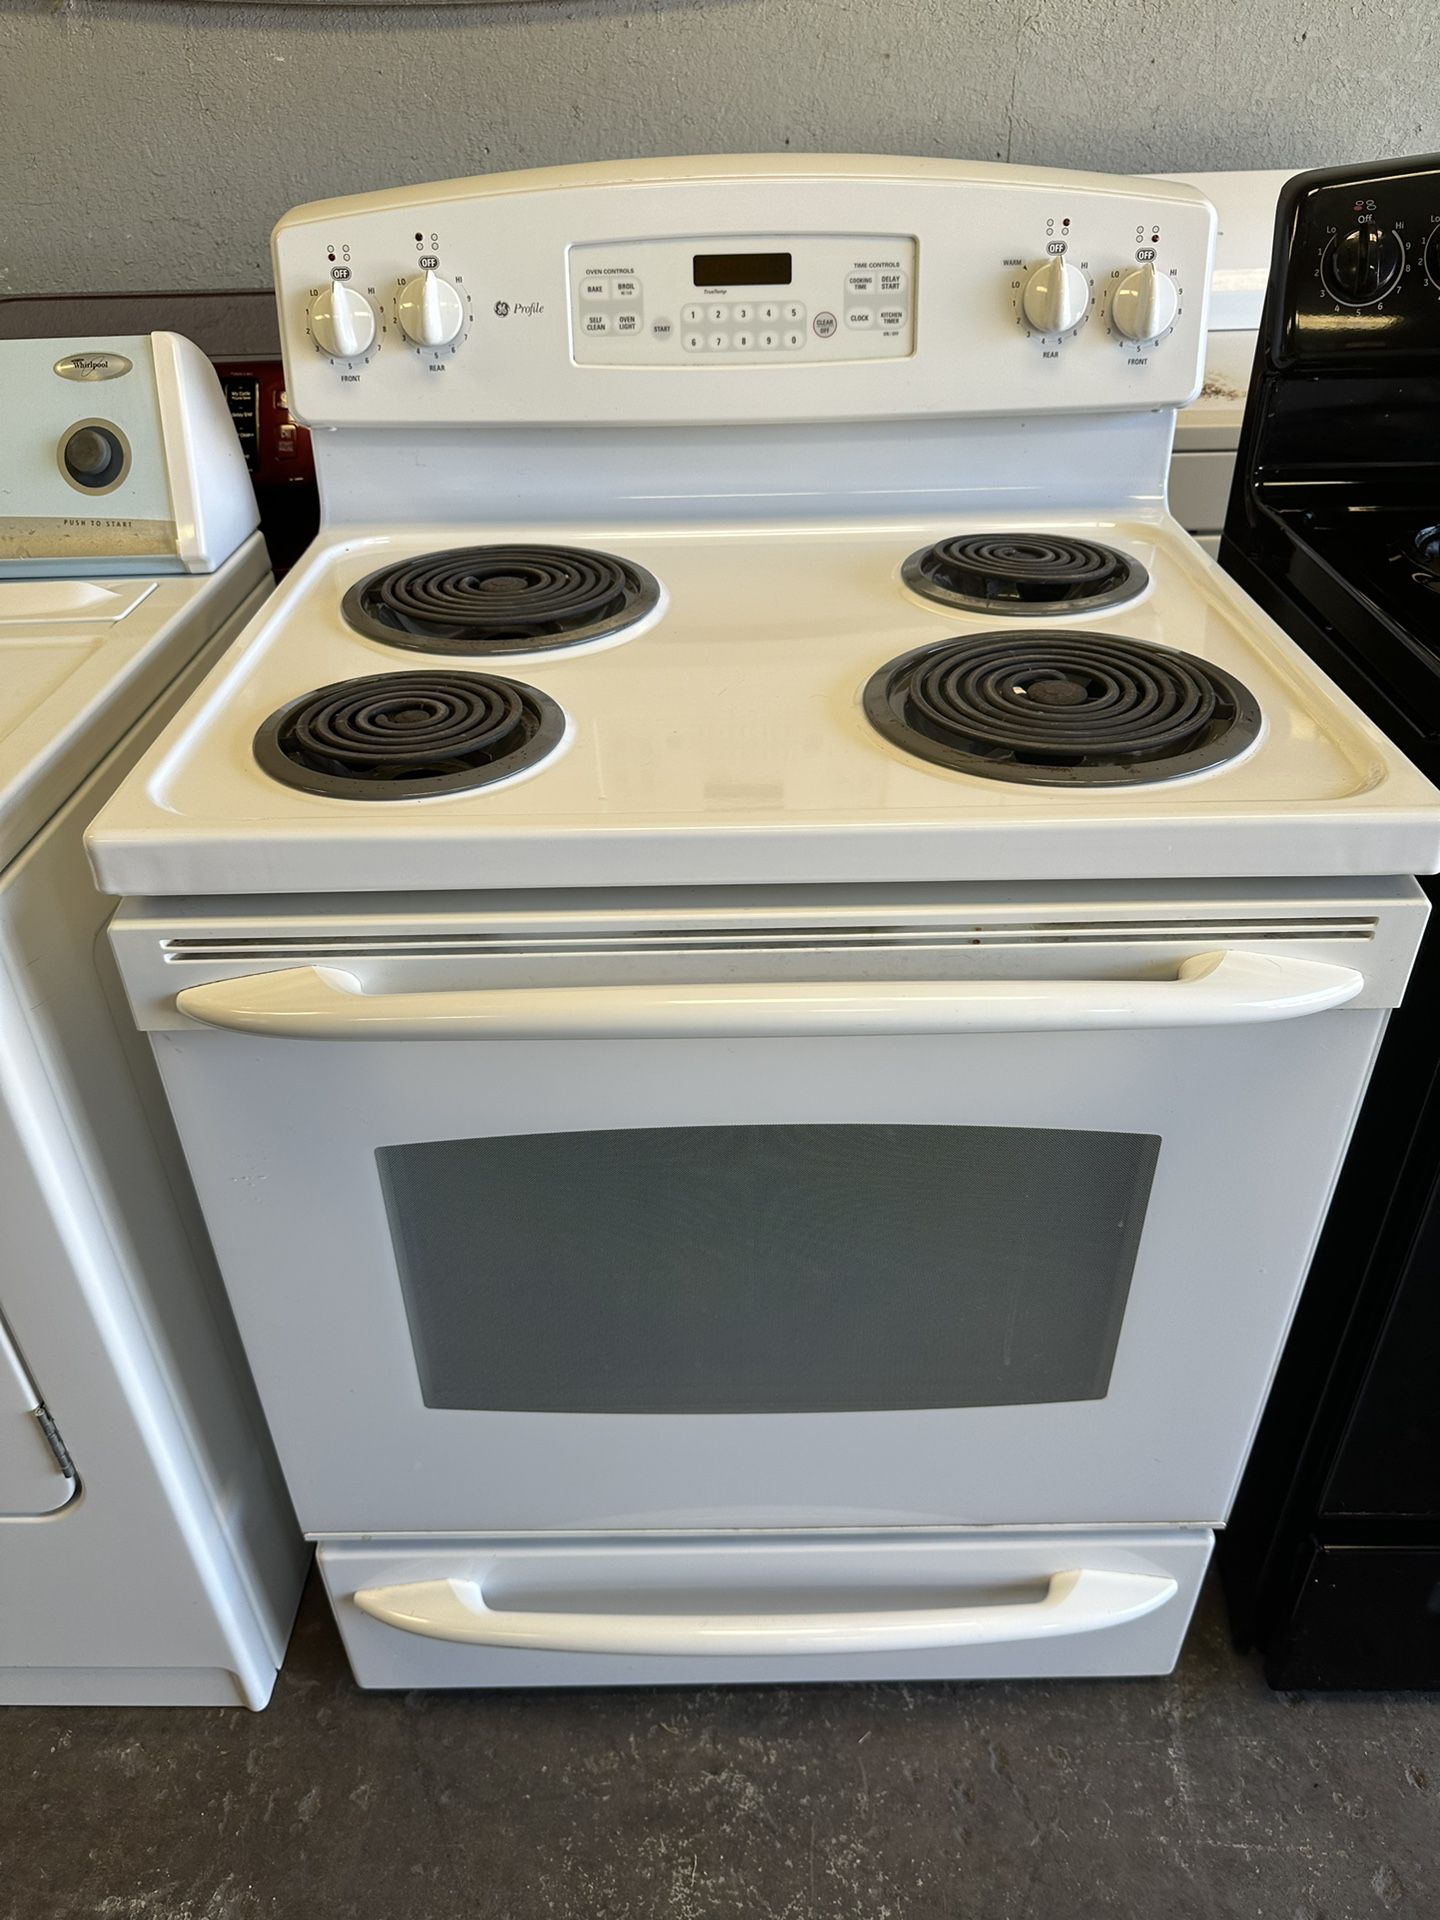  White electric stove can deliver 